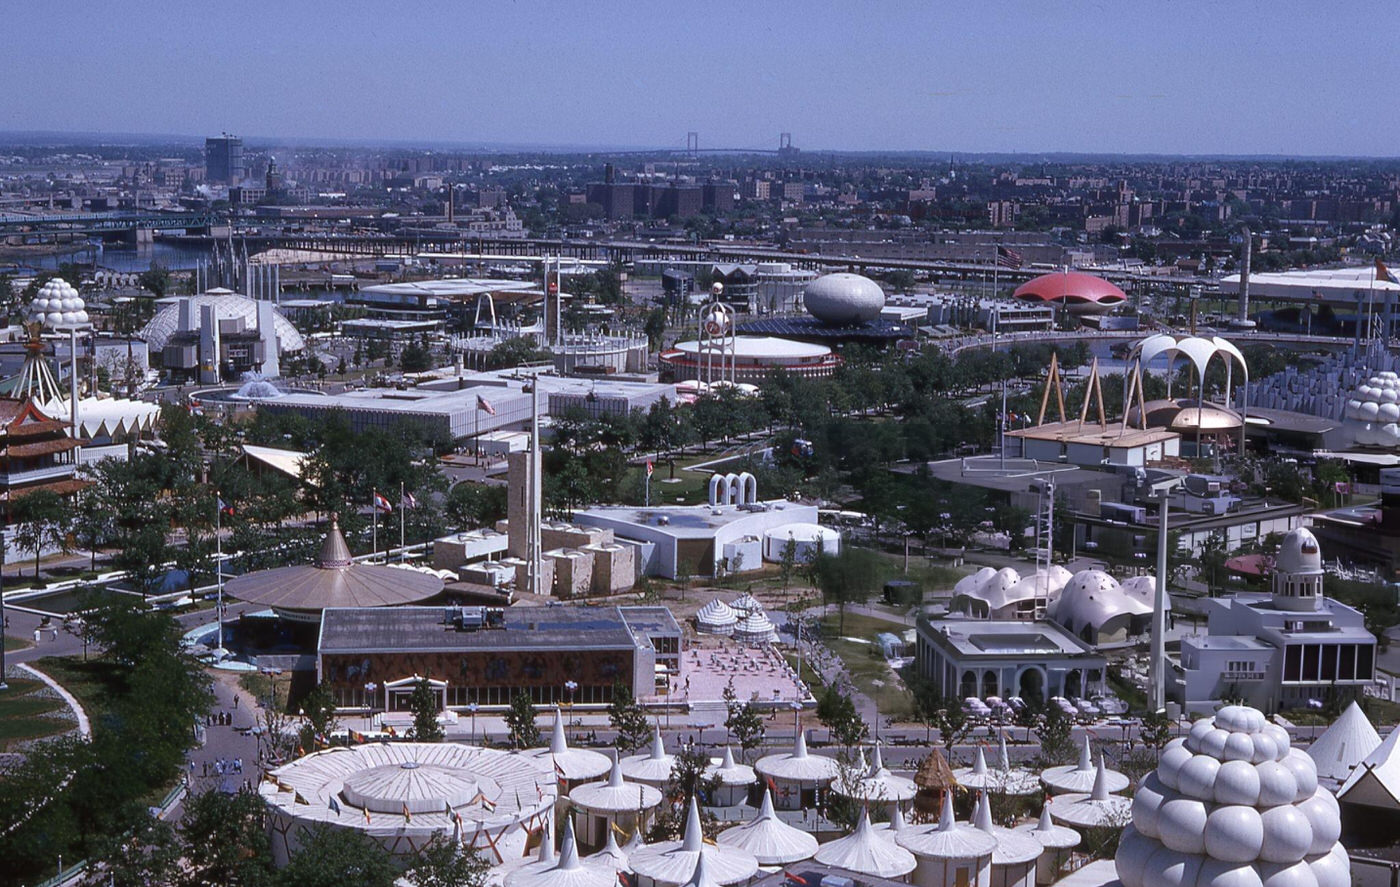 Bird'S-Eye View Of Pavilions And Exhibits At The 1964 New York World'S Fair, Flushing Meadows Park, Queens, 1964.